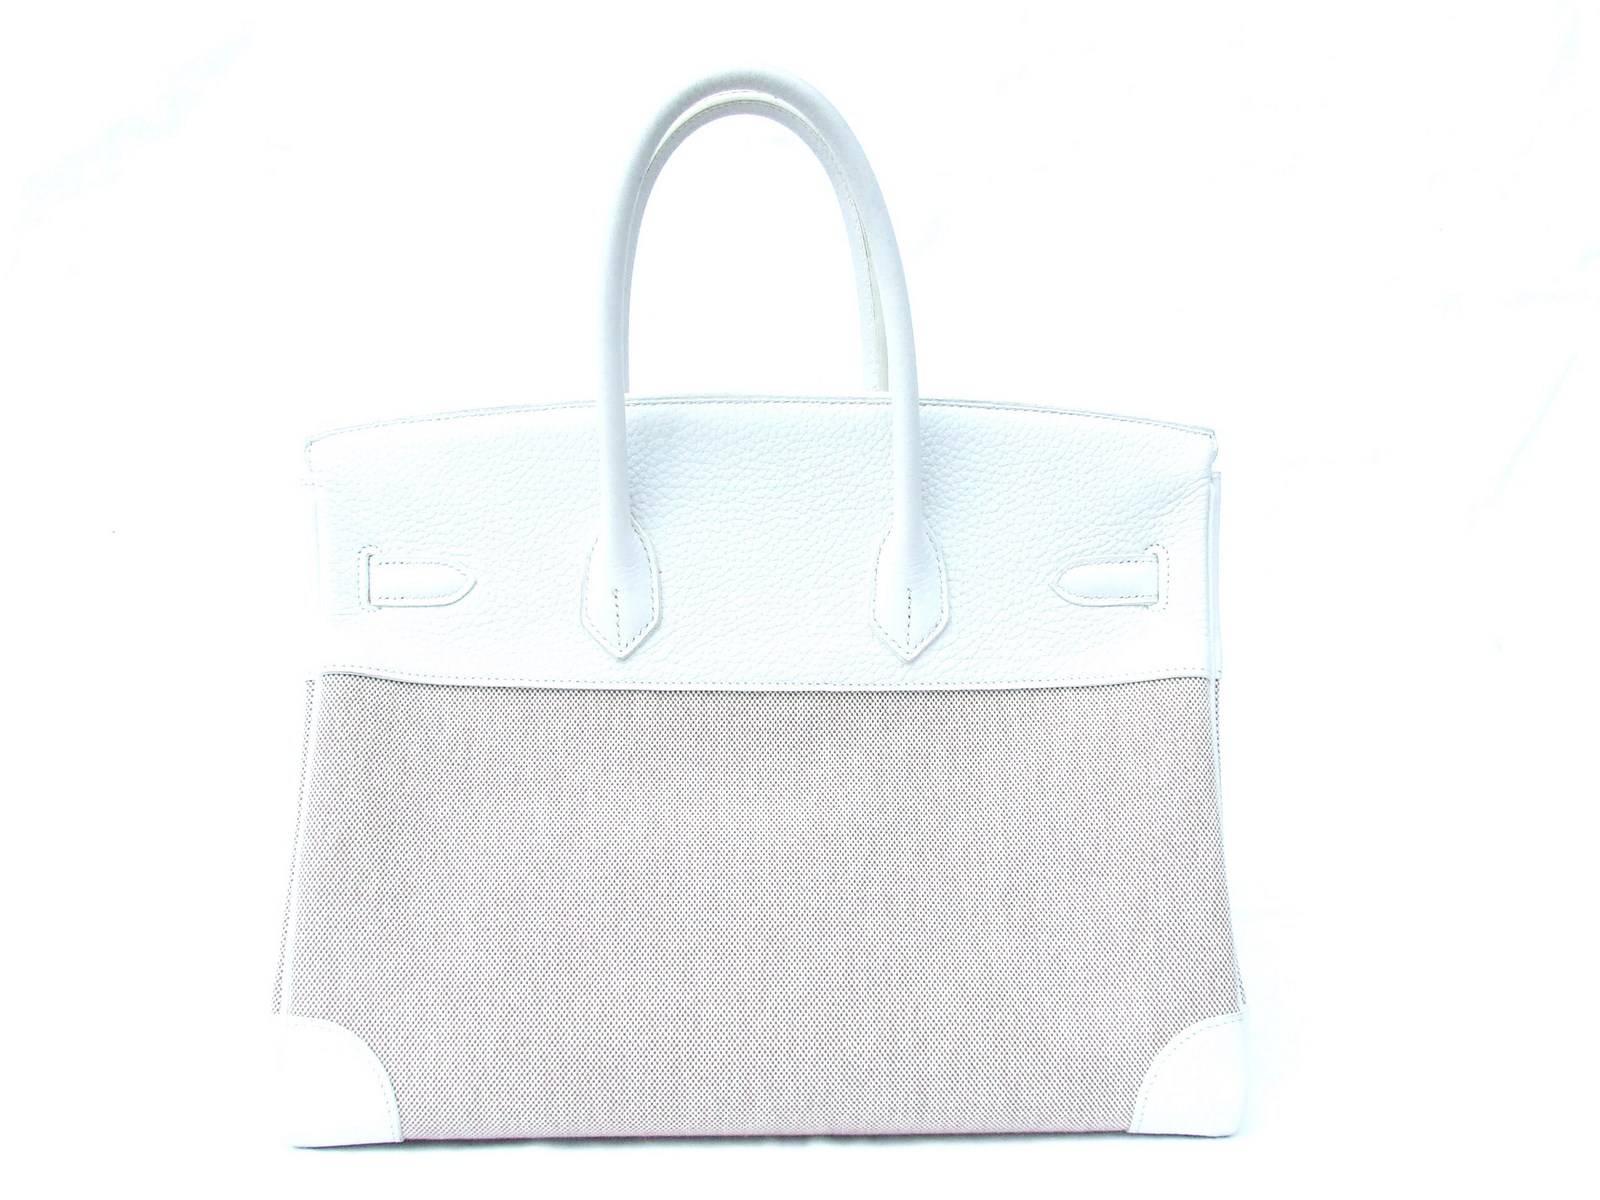 Beautiful and rare Authentic Hermes Handbag

BIRKIN

Made in France

Stamp N in a square (2010)

Made of Clemence Leather, Canvas (toile), Golden Hardware

Colorway: White and Beige

Lined with white smooth leather

